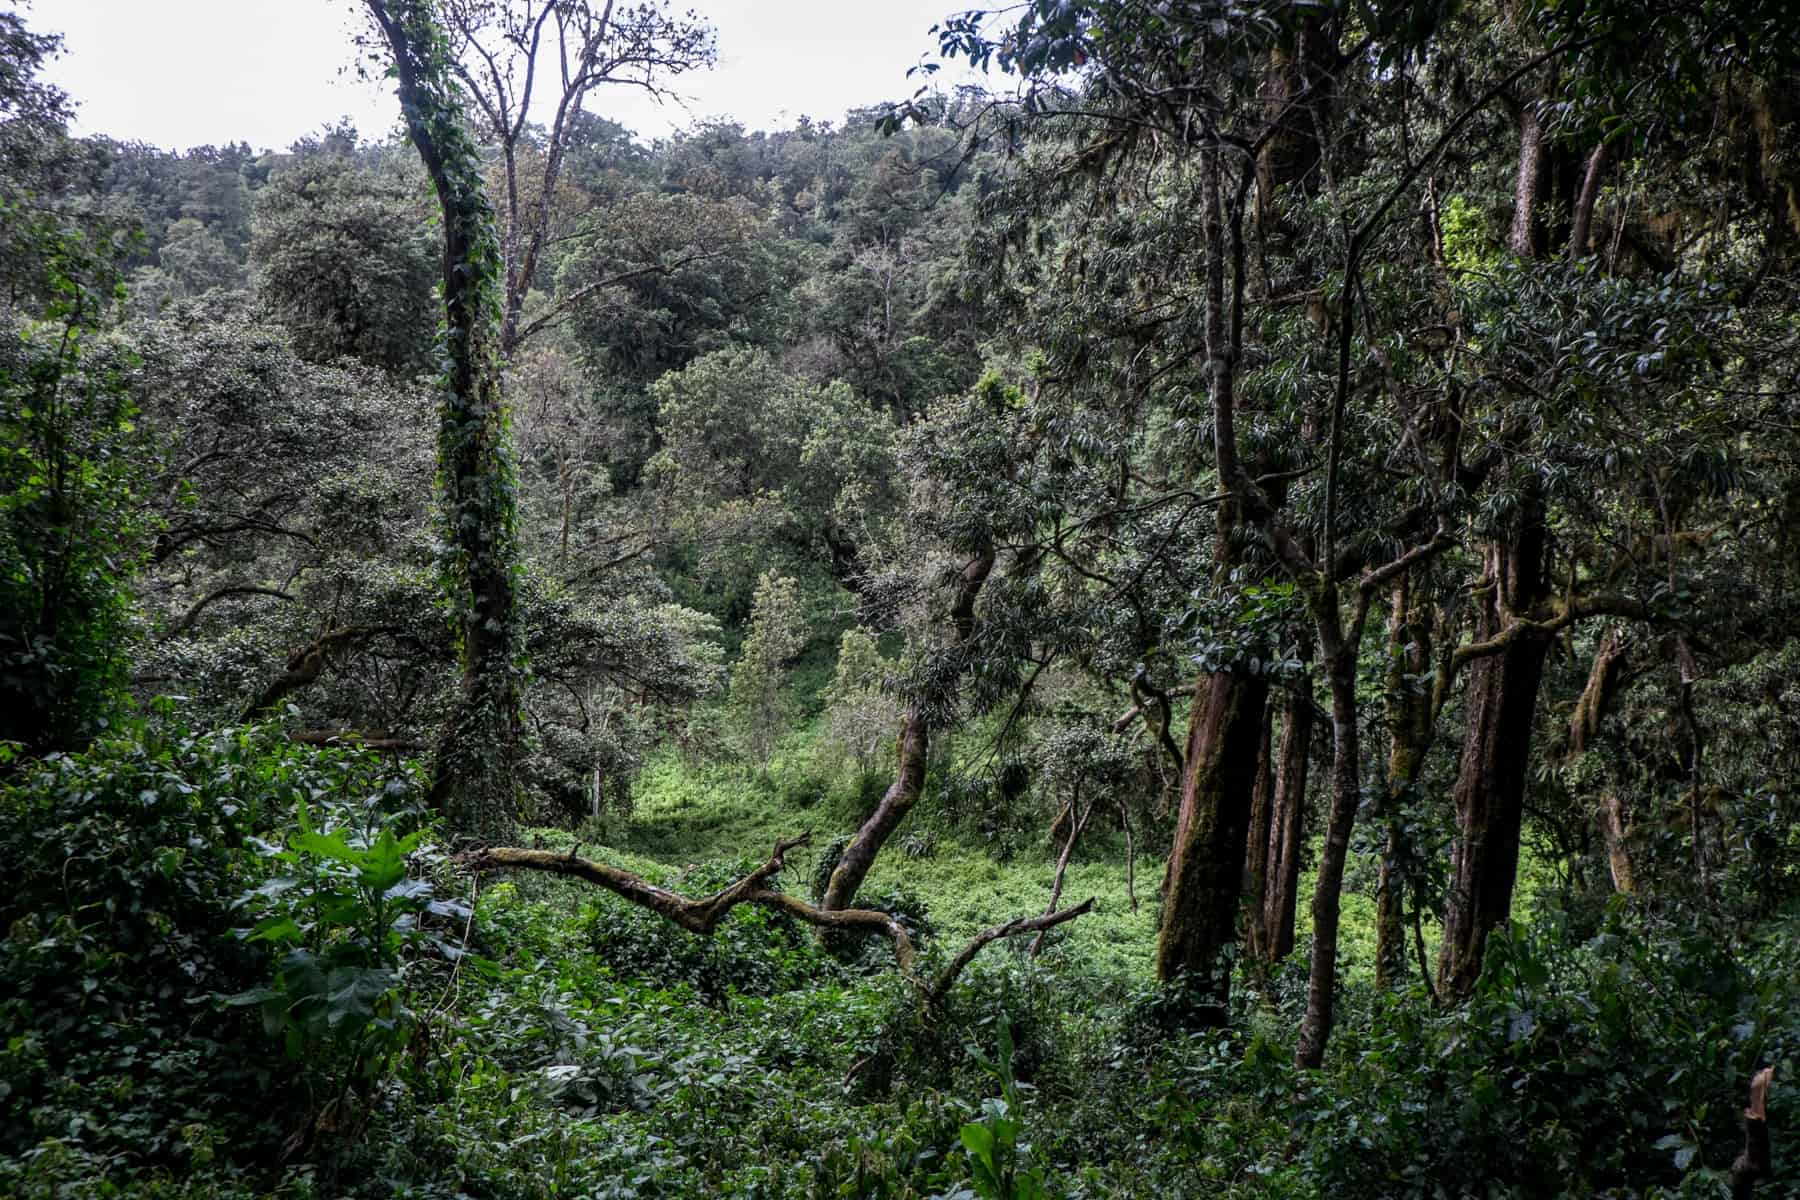 The densely packed trees and green vegetation of the Rainforest Zone when climbing Kilimanjaro.